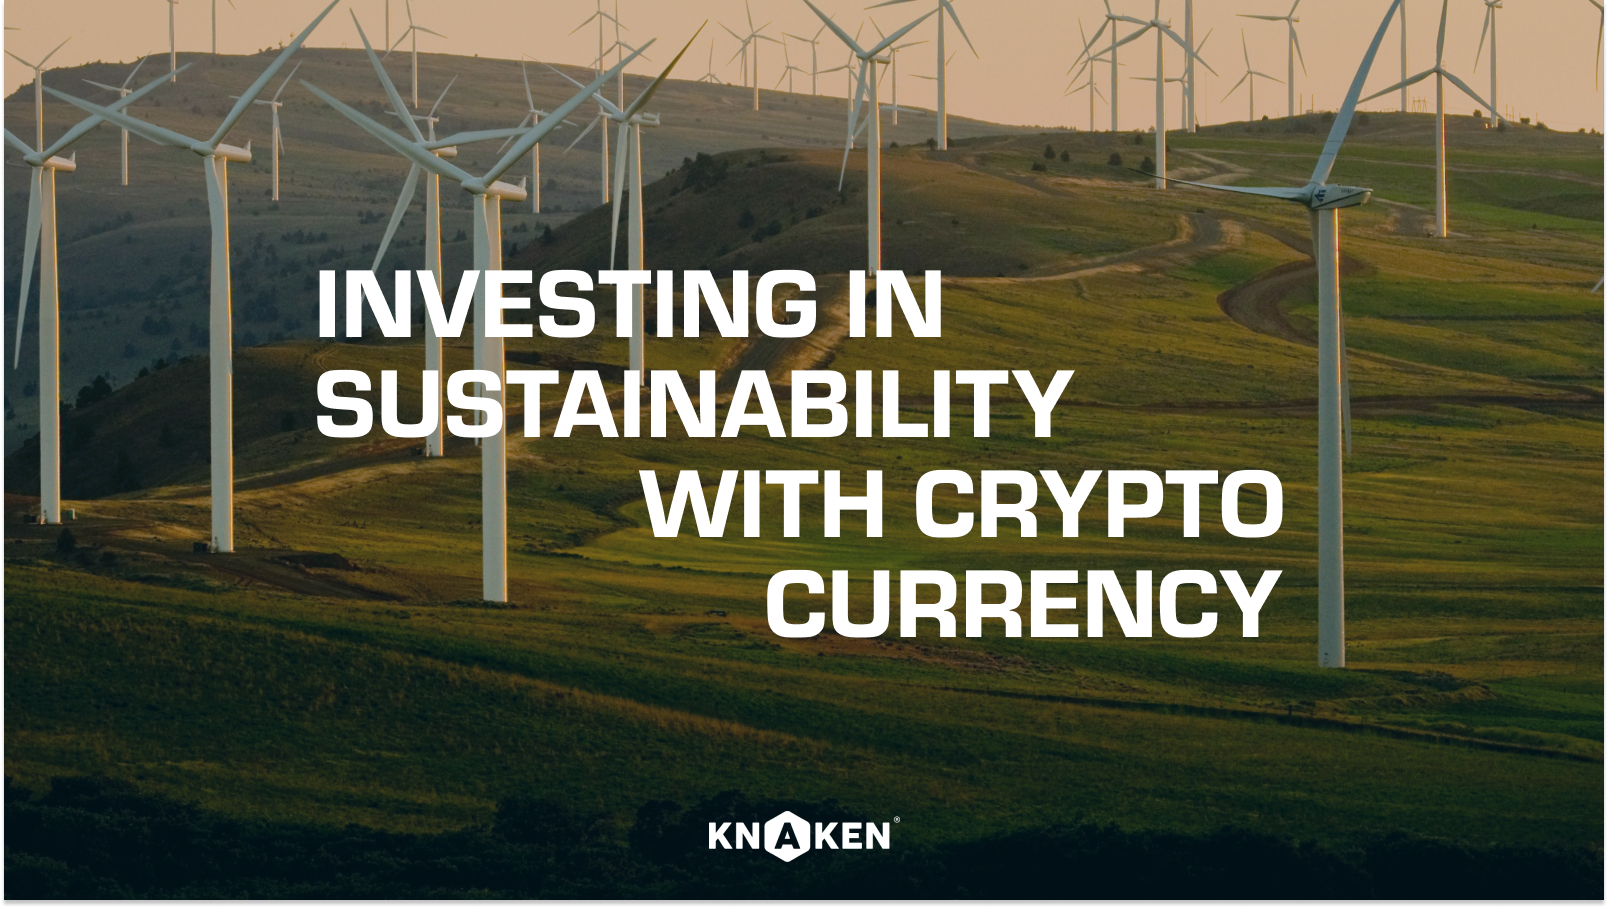 Investing in sustainability with crypto currency